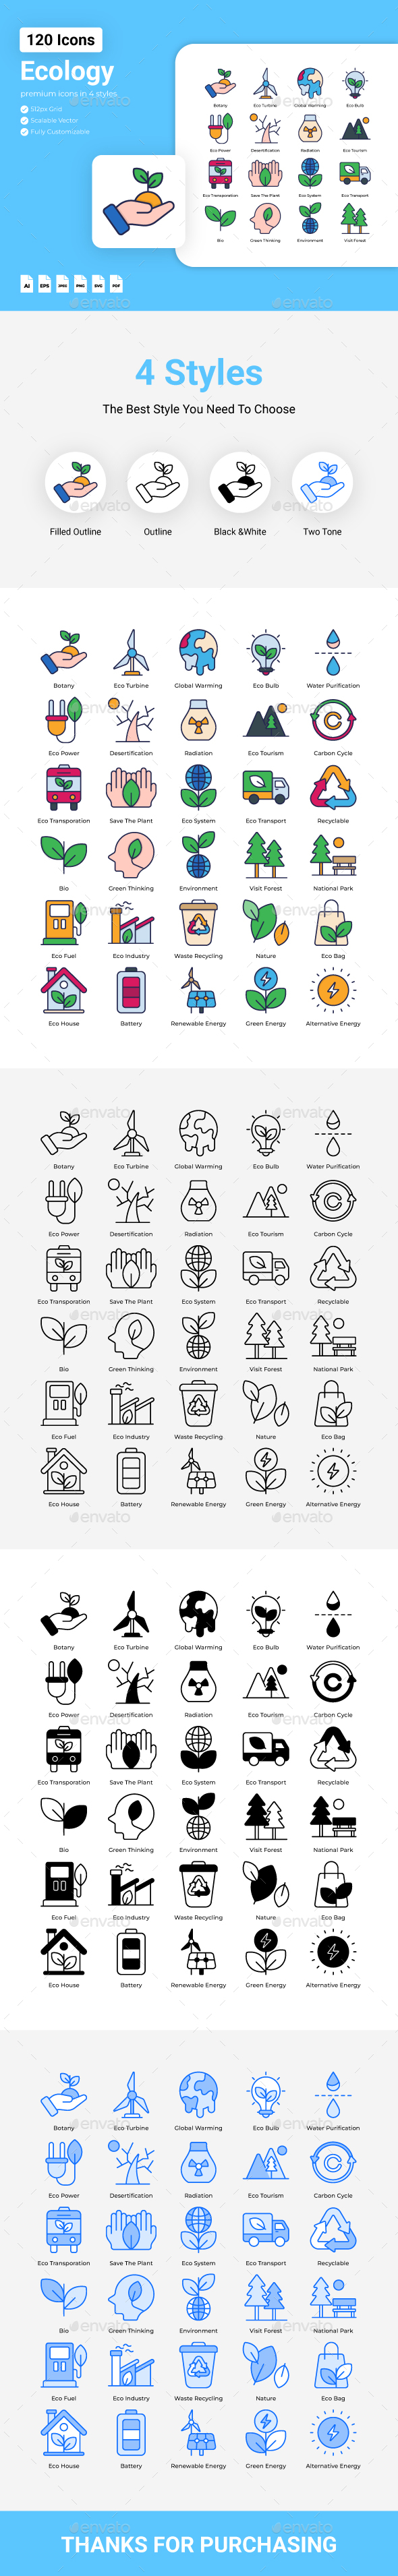 [DOWNLOAD]Ecology Icons